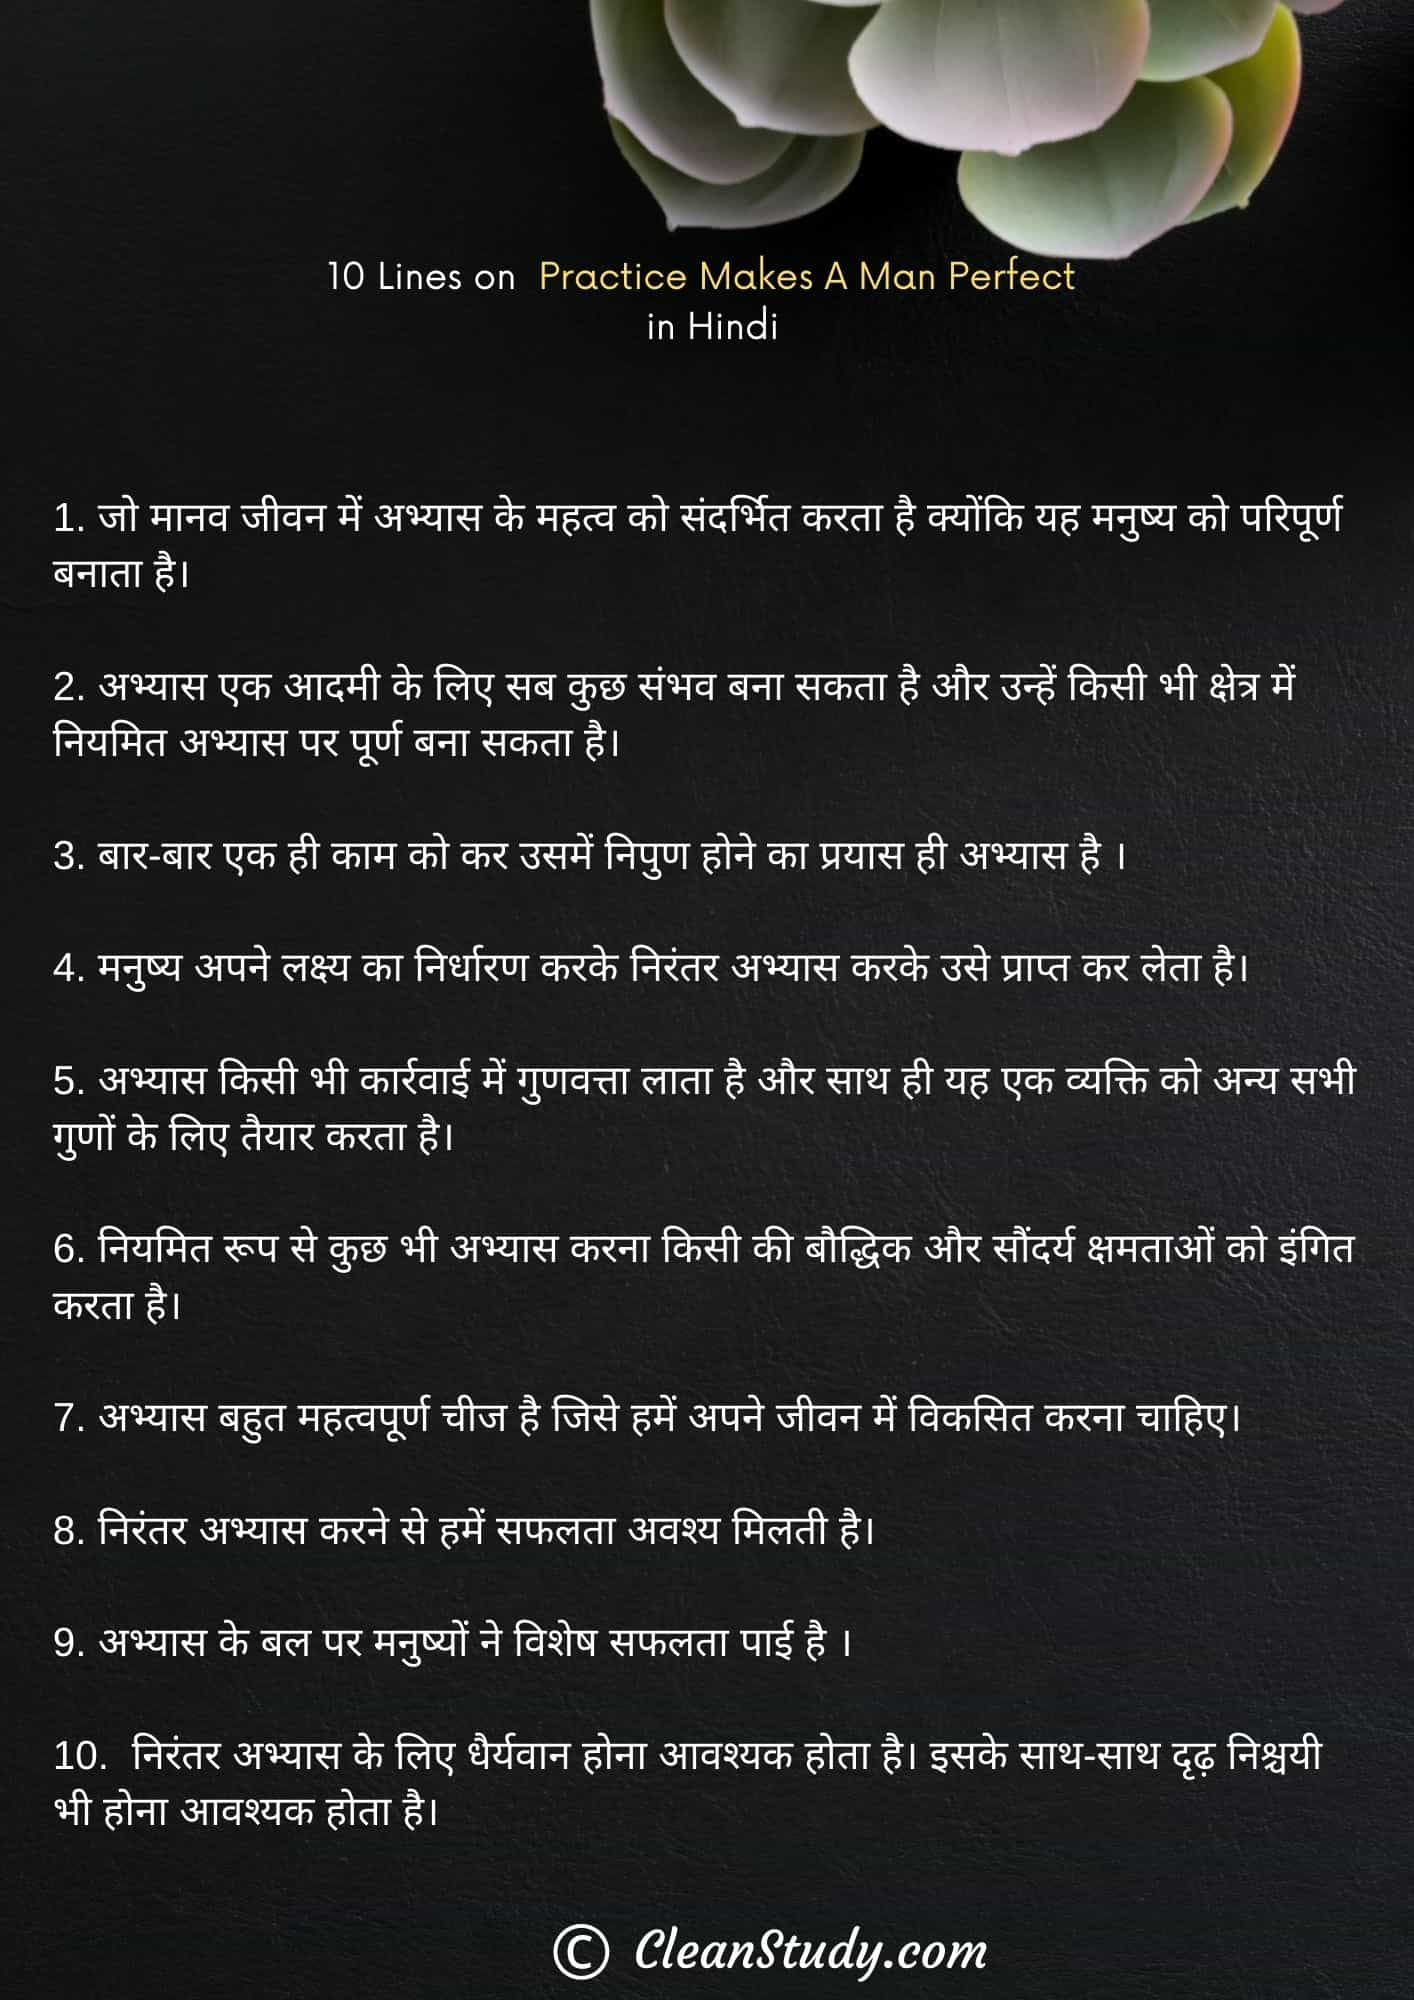 10 Lines on Practice Makes A Man Perfect in Hindi